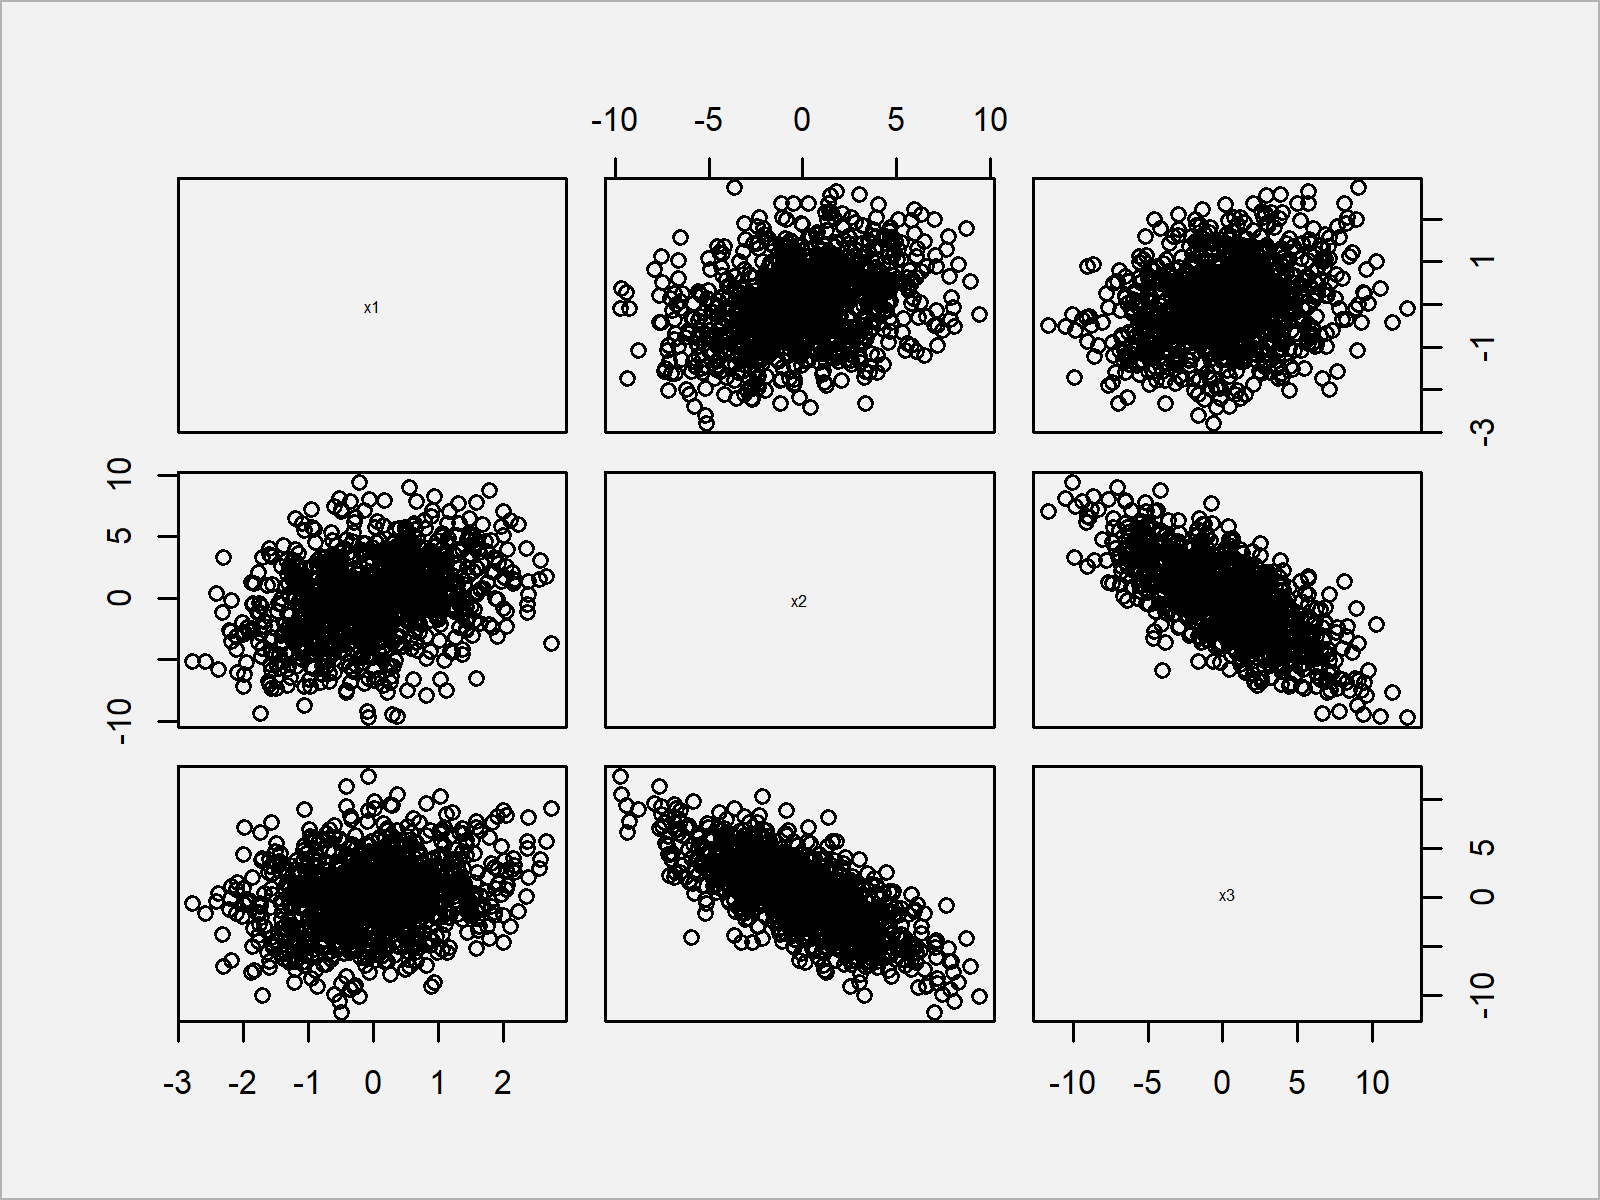 pairs plot modify size of labels